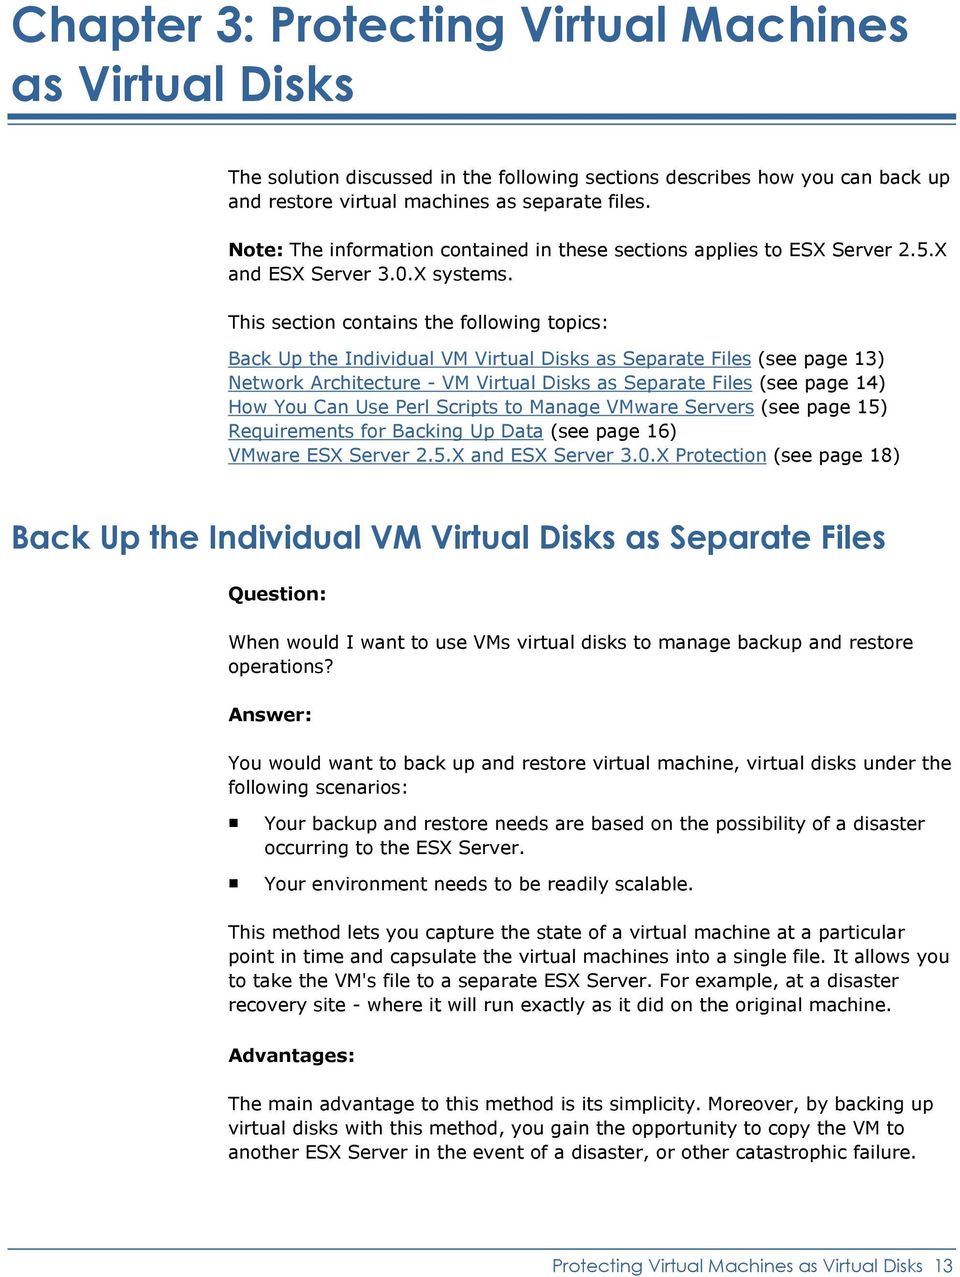 This section contains the following topics: Back Up the Individual VM Virtual Disks as Separate Files (see page 13) Network Architecture - VM Virtual Disks as Separate Files (see page 14) How You Can